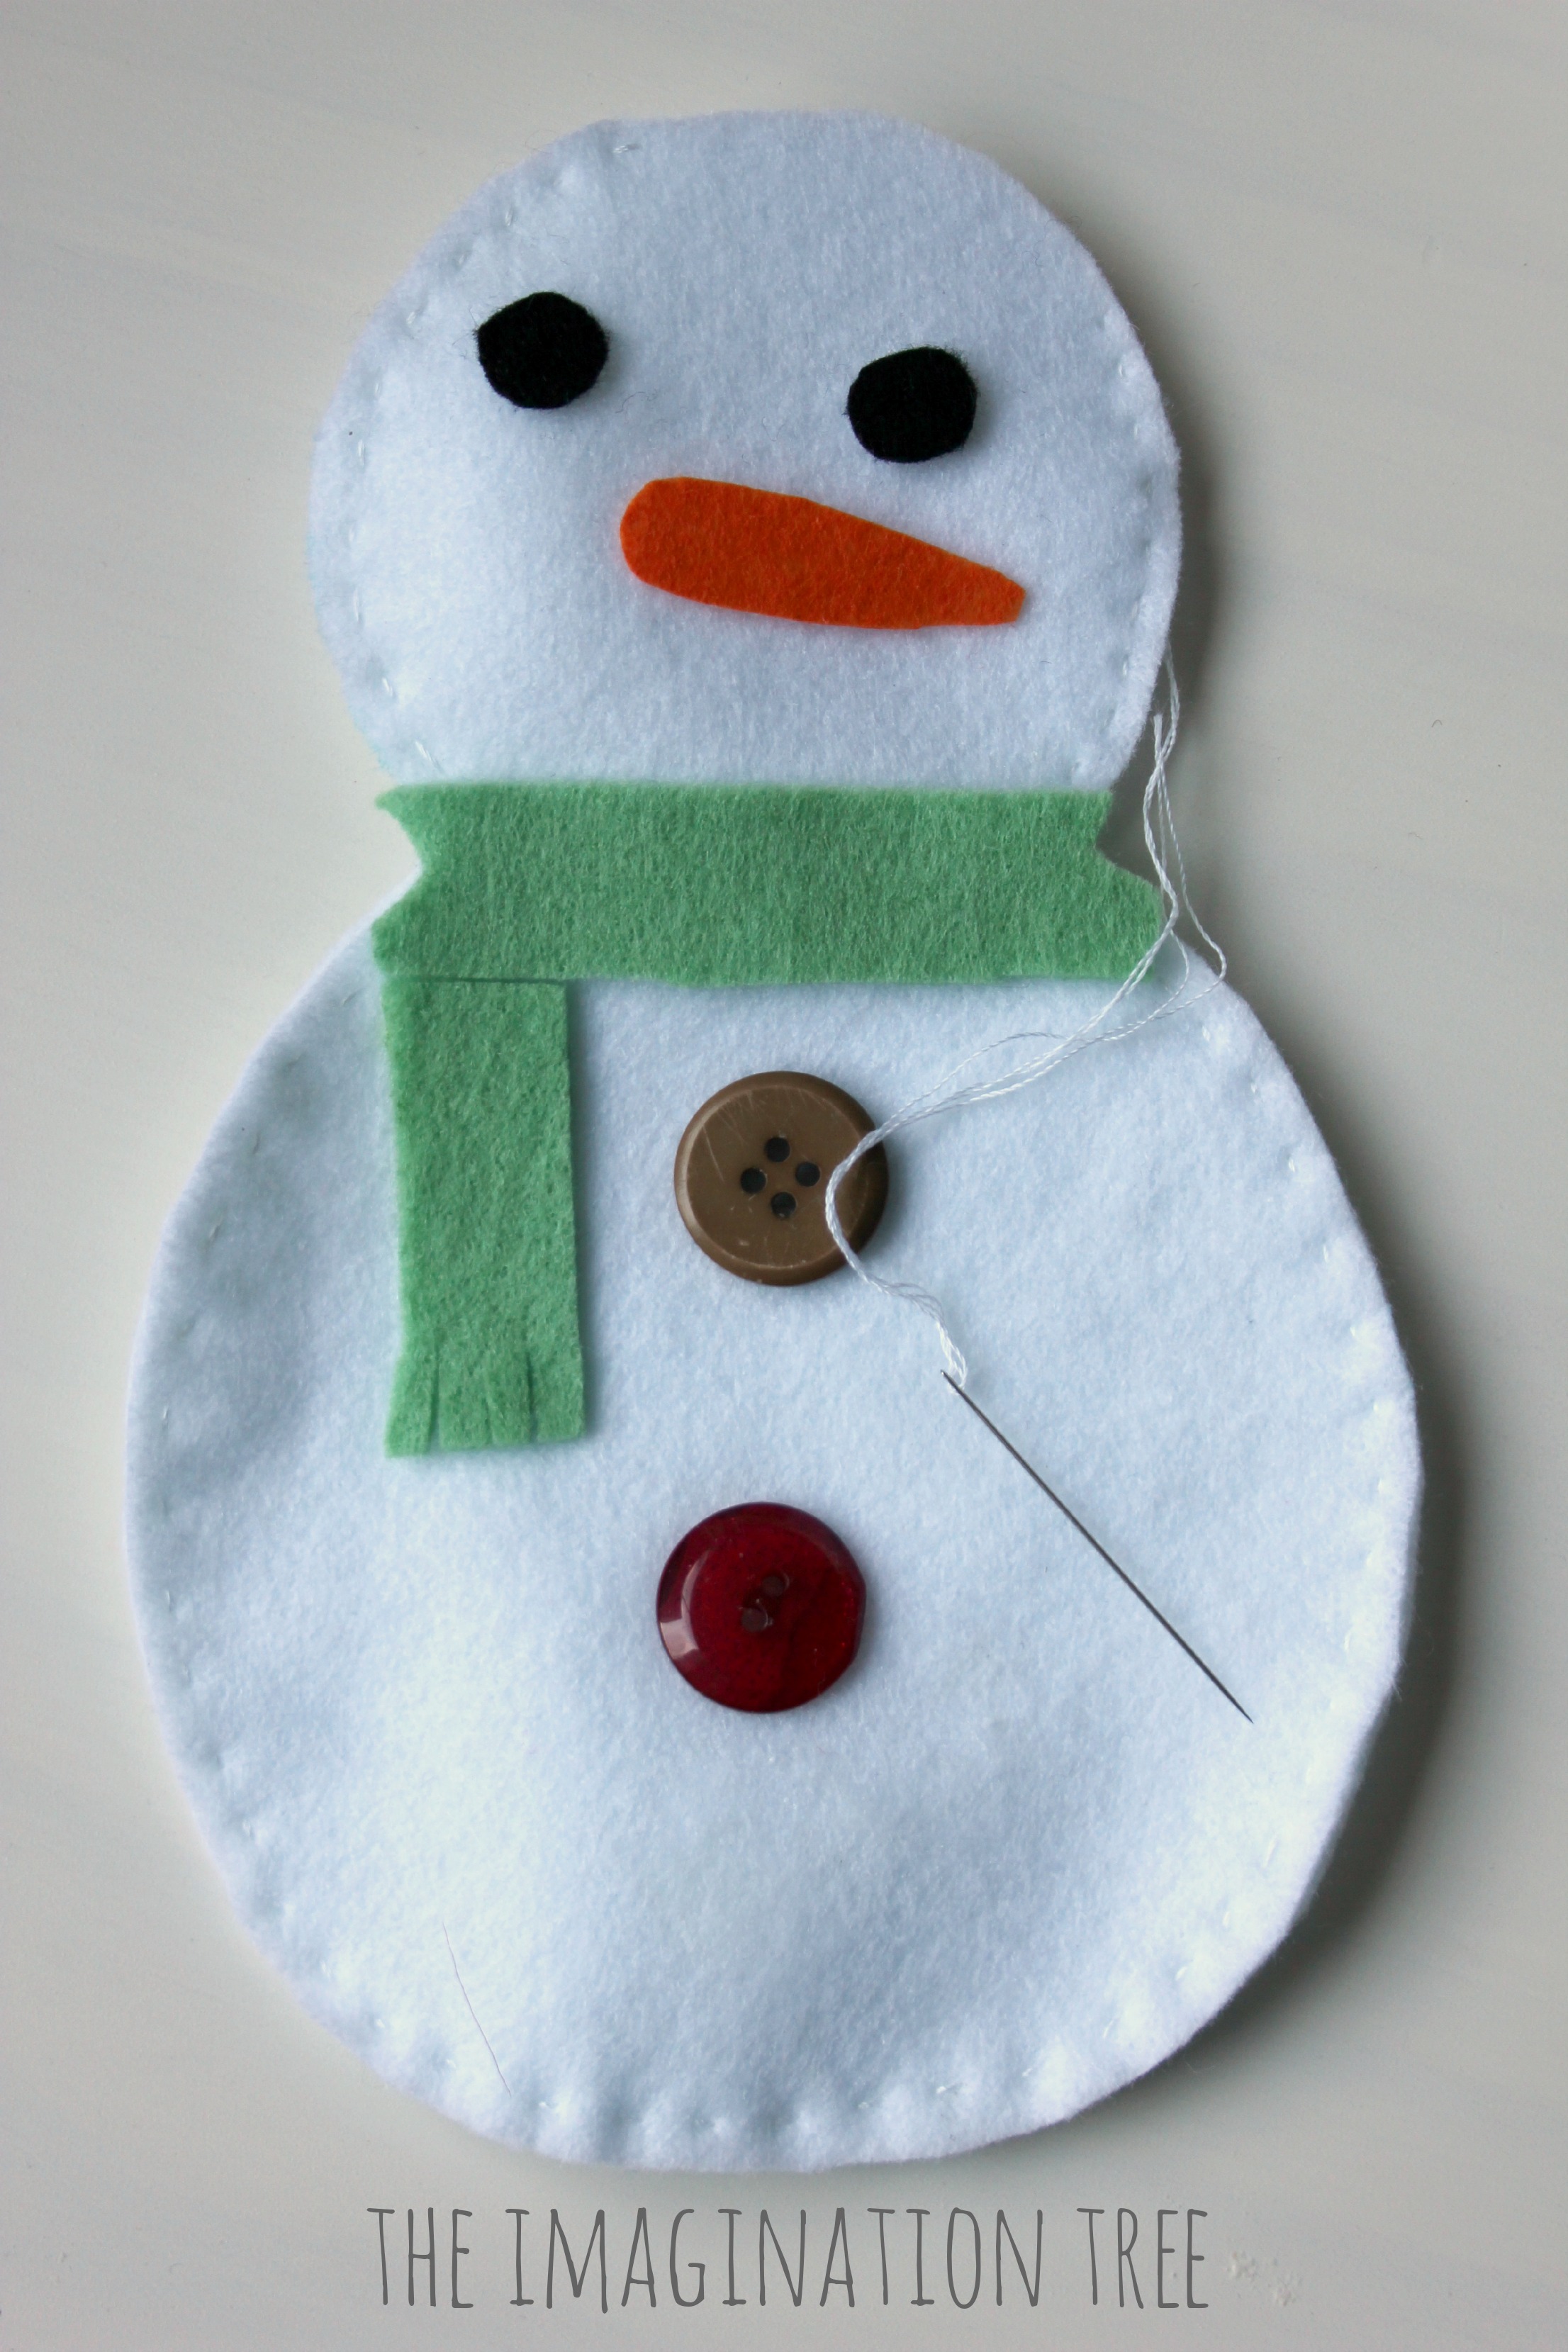 Details about   S35 CLOTH SNOWMAN ORNAMENTS each priced separately MANY CHOICES Plush Fabric 